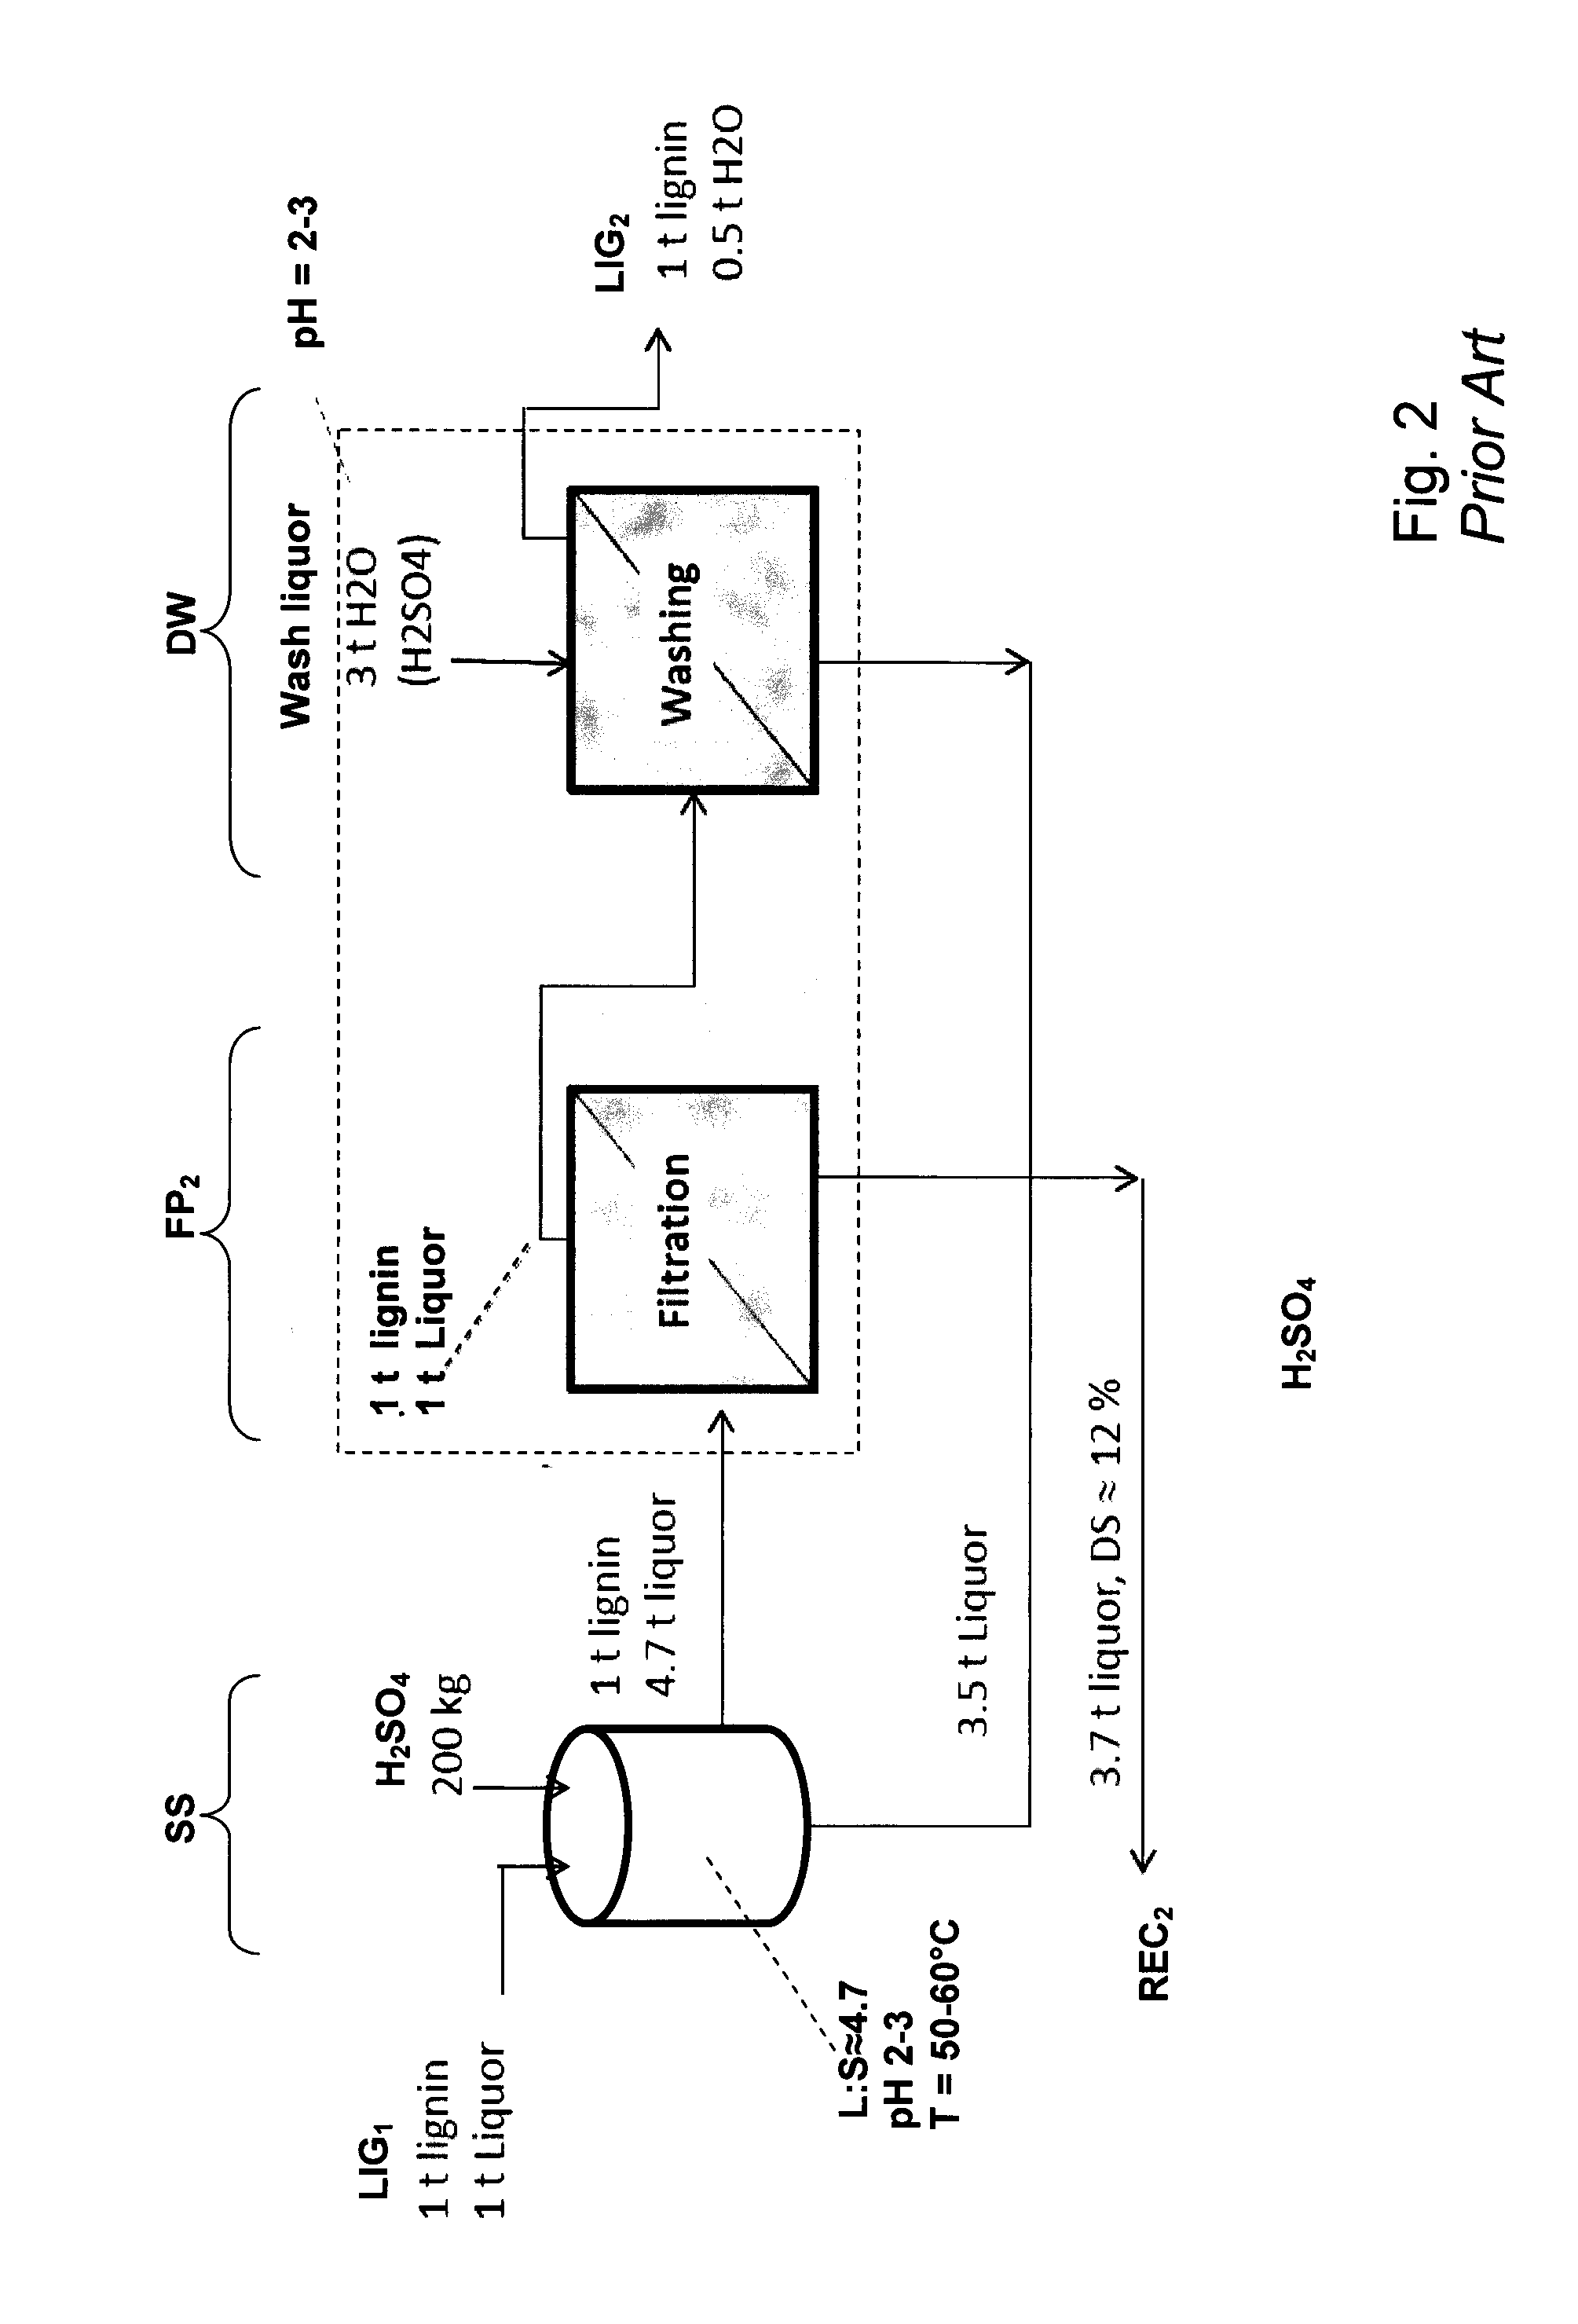 Method for producing high purity lignin